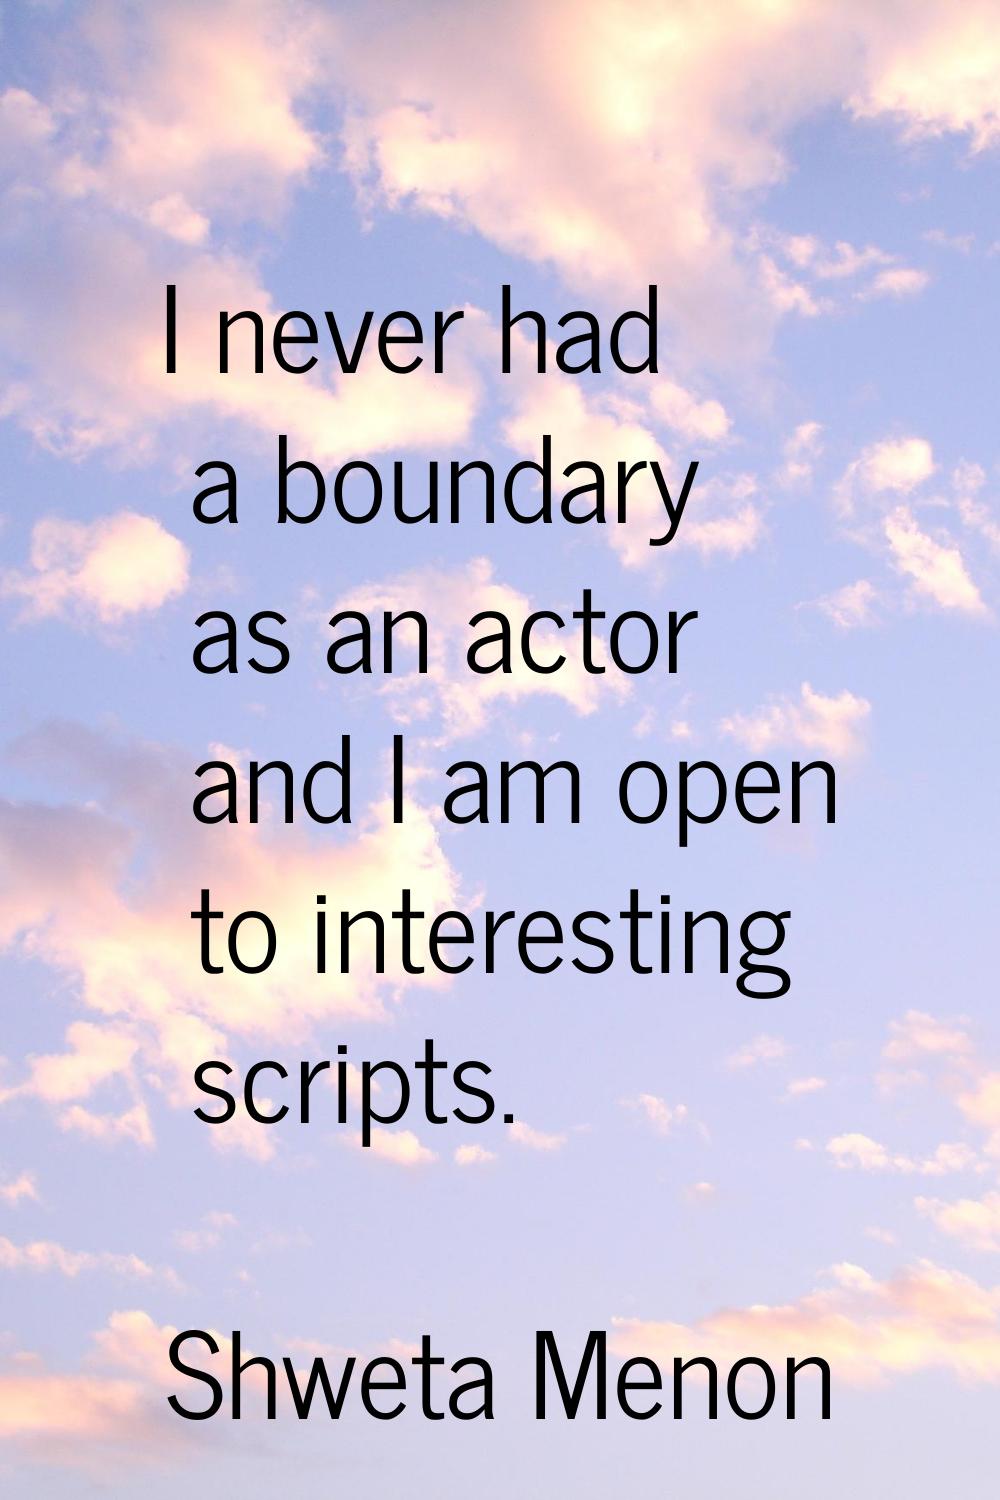 I never had a boundary as an actor and I am open to interesting scripts.